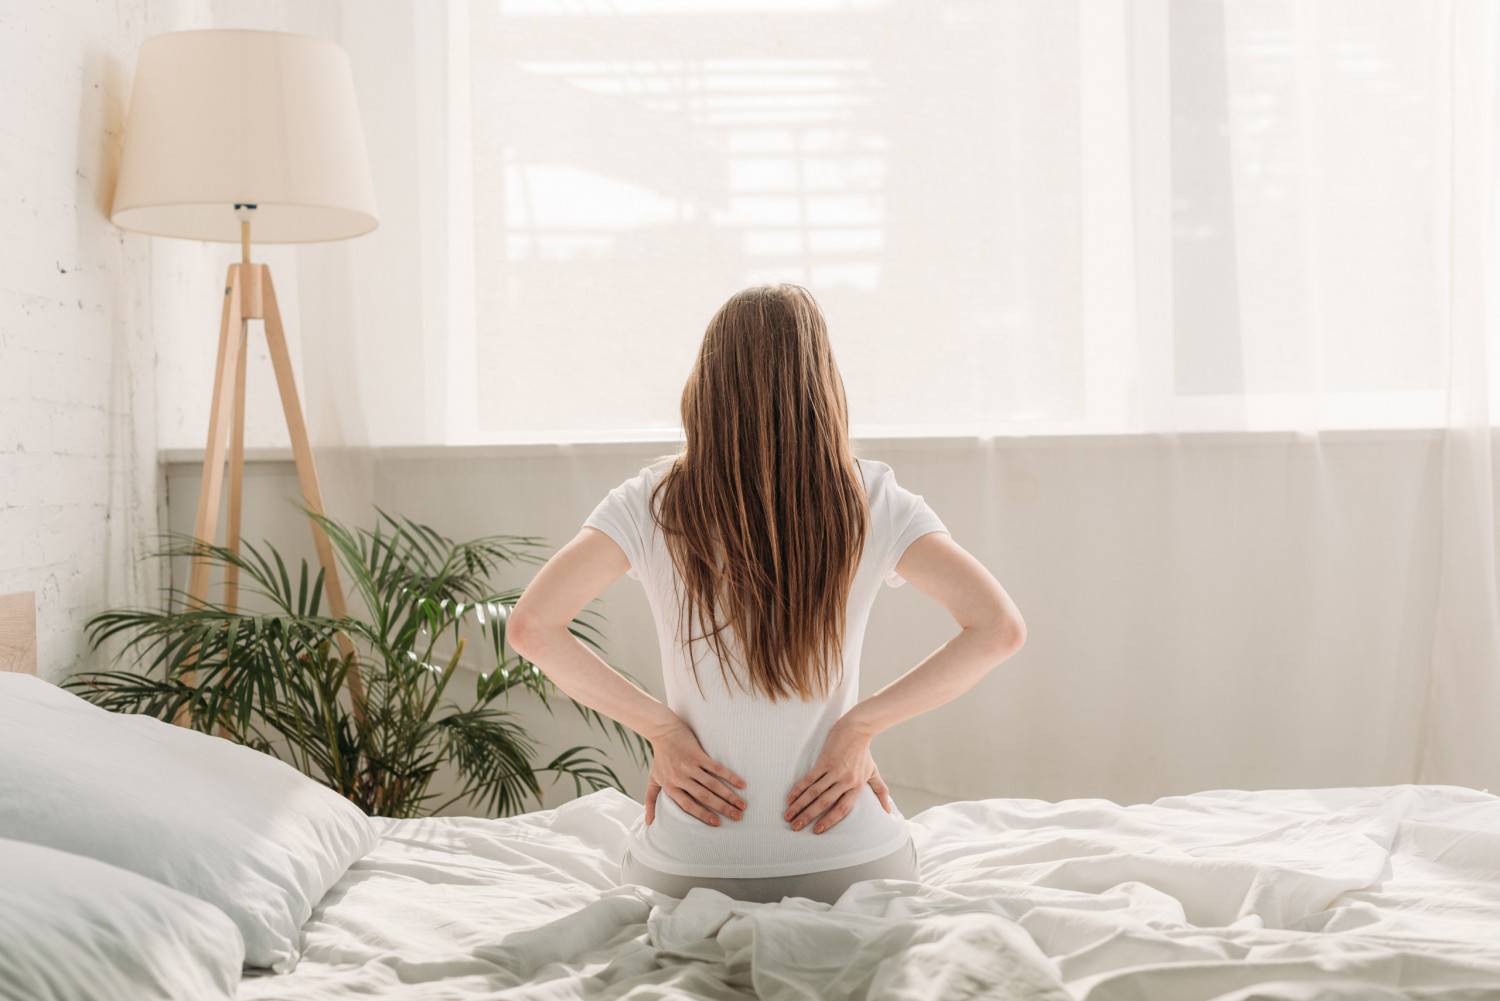 Can Breast Reduction Help Lower Back Pain